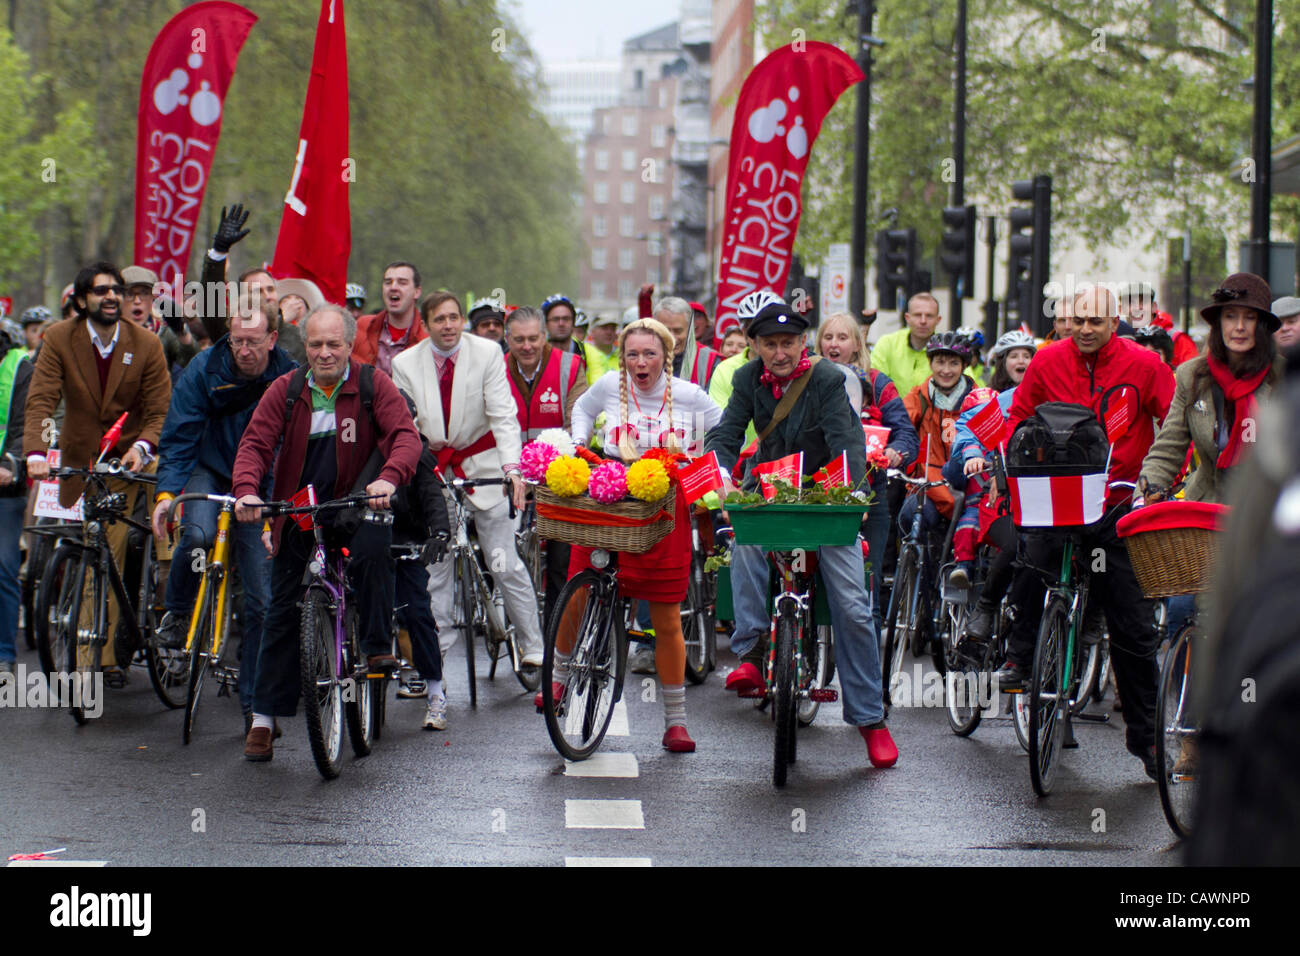 London, UK. 28th April.Around 10,000 people gathered for 'The BIG RIDE' Campaign organized by the' London Cycling Campaigners'. The LCC are calling for the mayoral election candidates to commit to continental-standard cycling infrastructure in the capital. Stock Photo